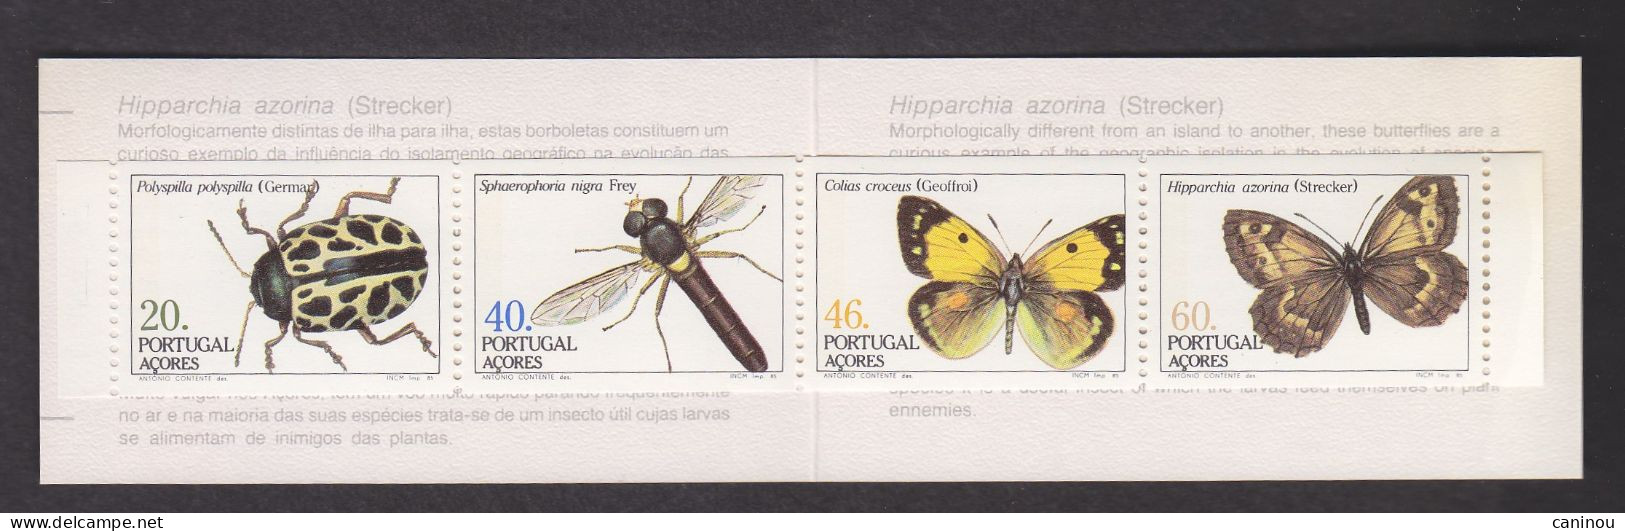 PORTUGAL ACORES CARNET PAPILLONS  INSECTES 1985 Y & T  C358a NEUF SANS CHARNIERE - Azores